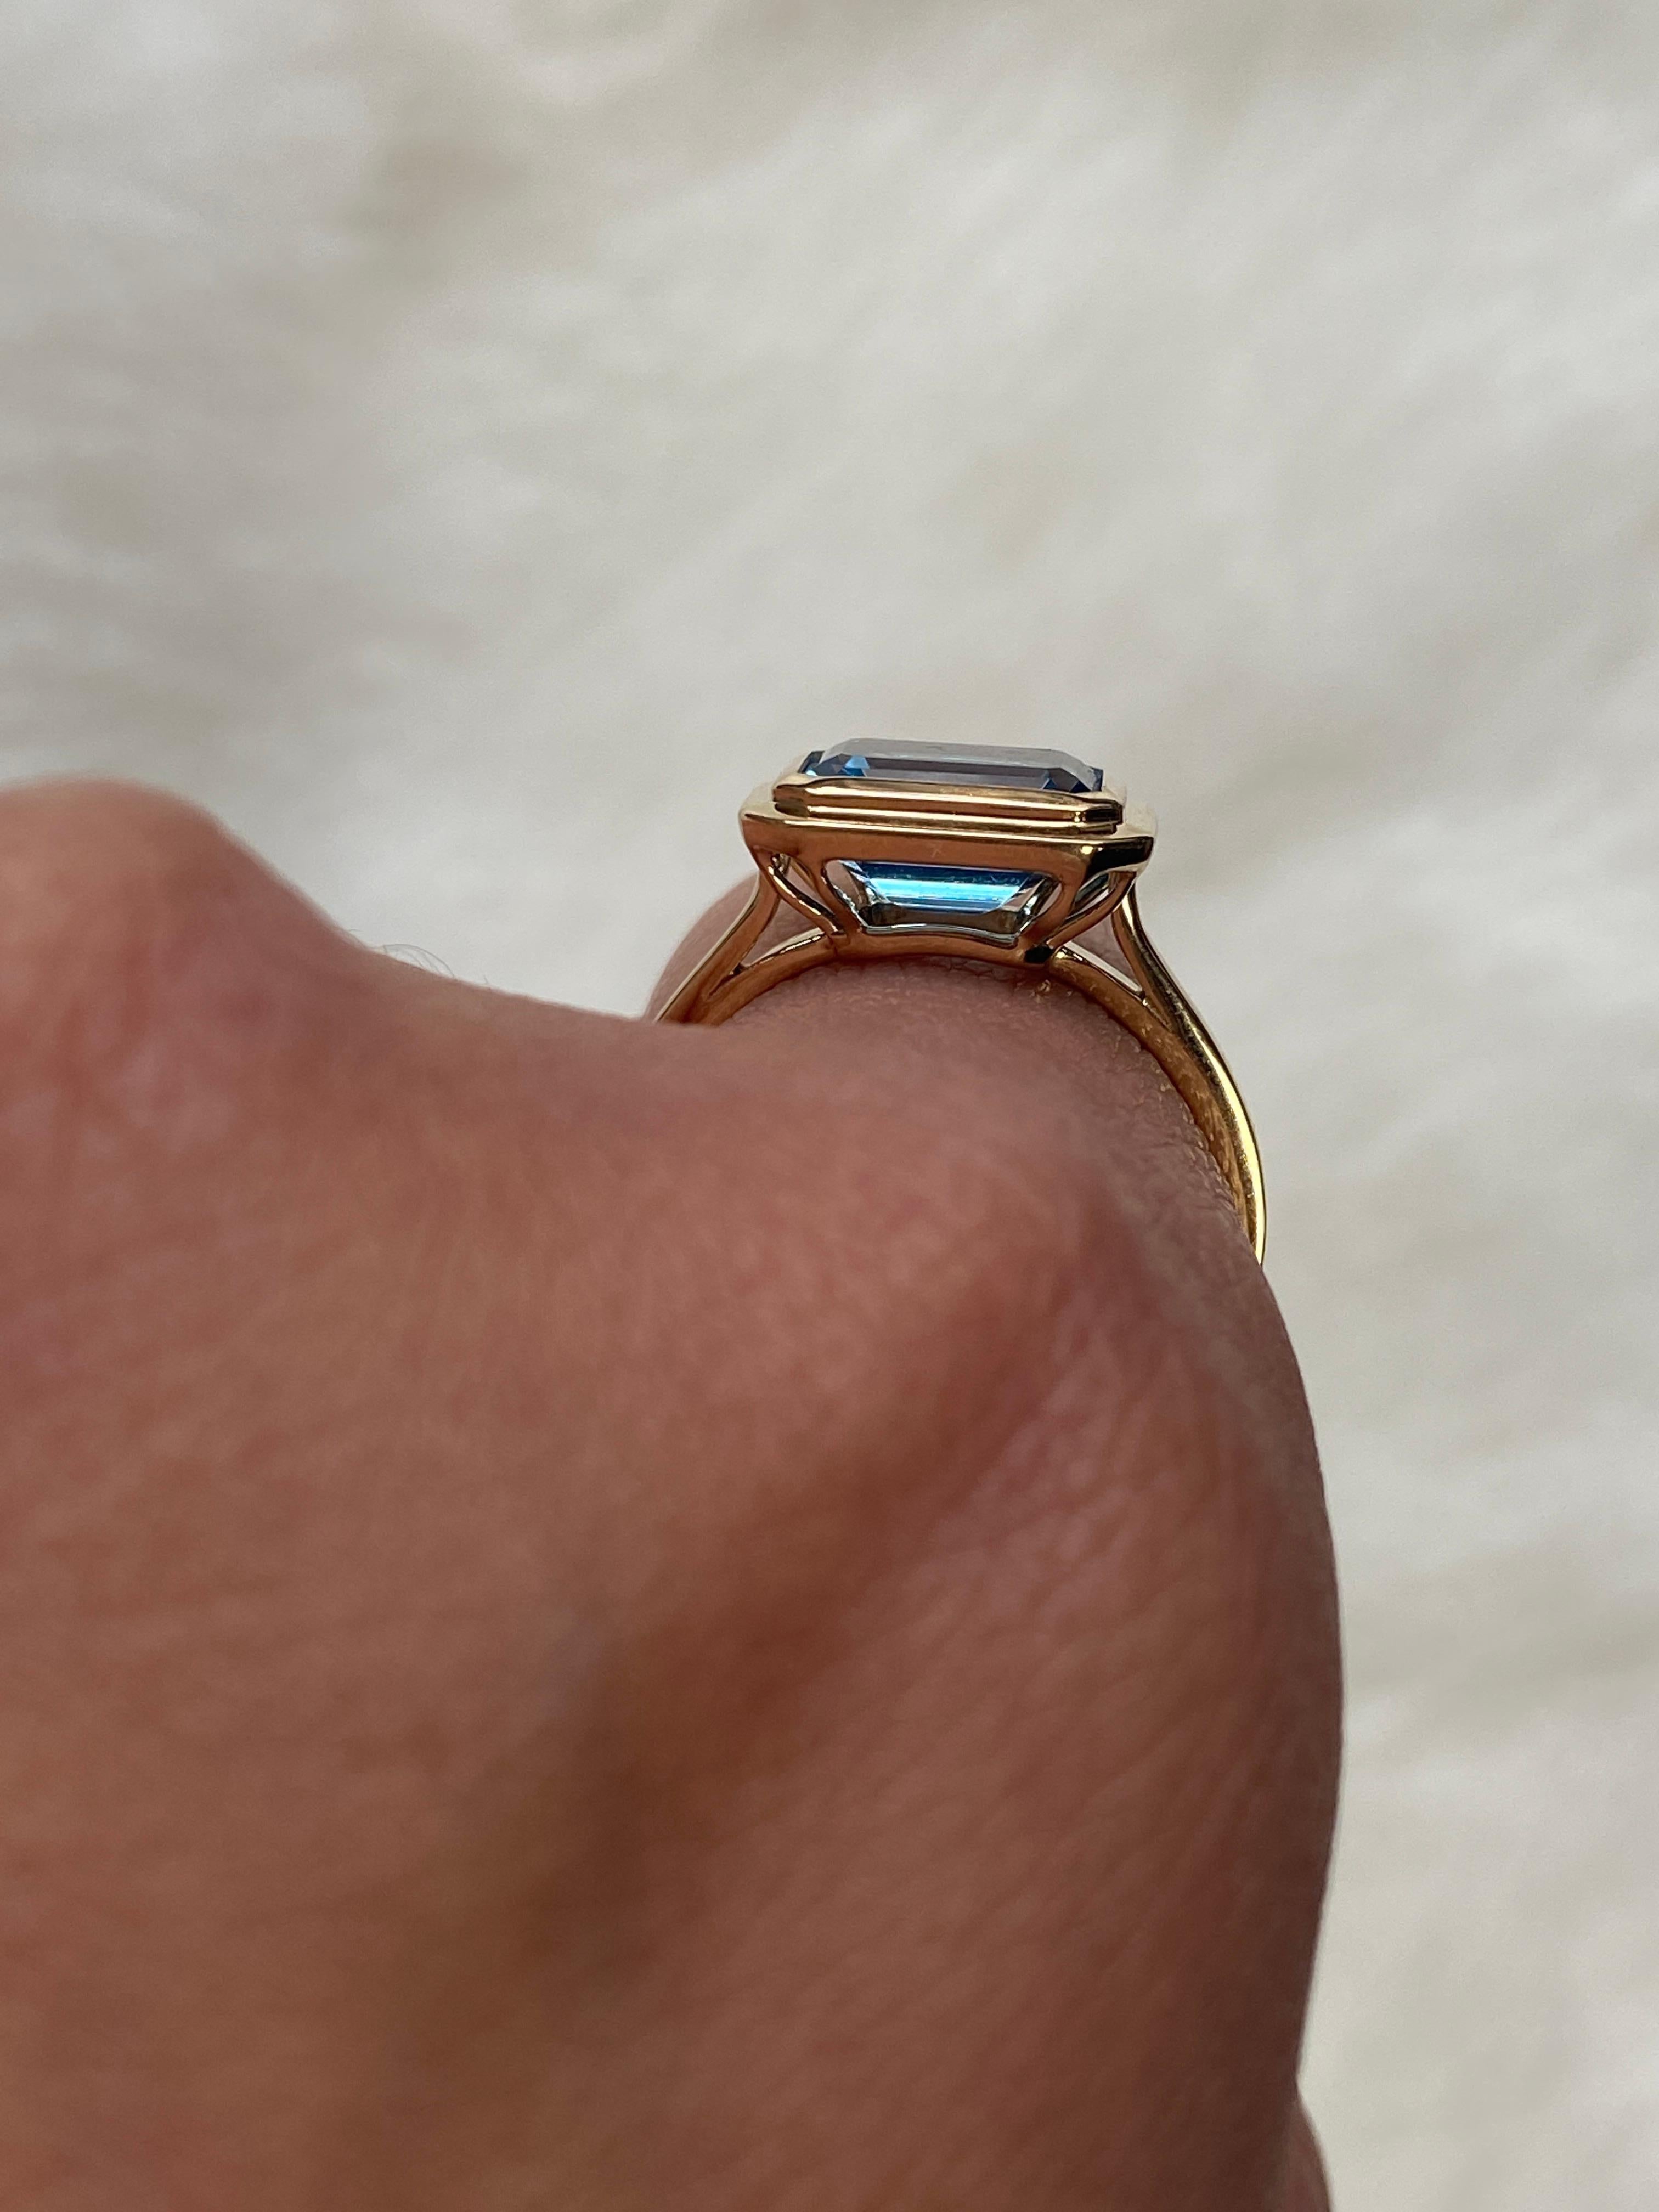 This Blue Topaz Emerald Cut Bezel Set Ring in 18K Yellow Gold is a sleek piece from the 'Manhattan' Collection. It features a stunning emerald-cut Blue Topaz stone set in a 18K yellow gold bezel. This ring embodies modern elegance, offering a touch